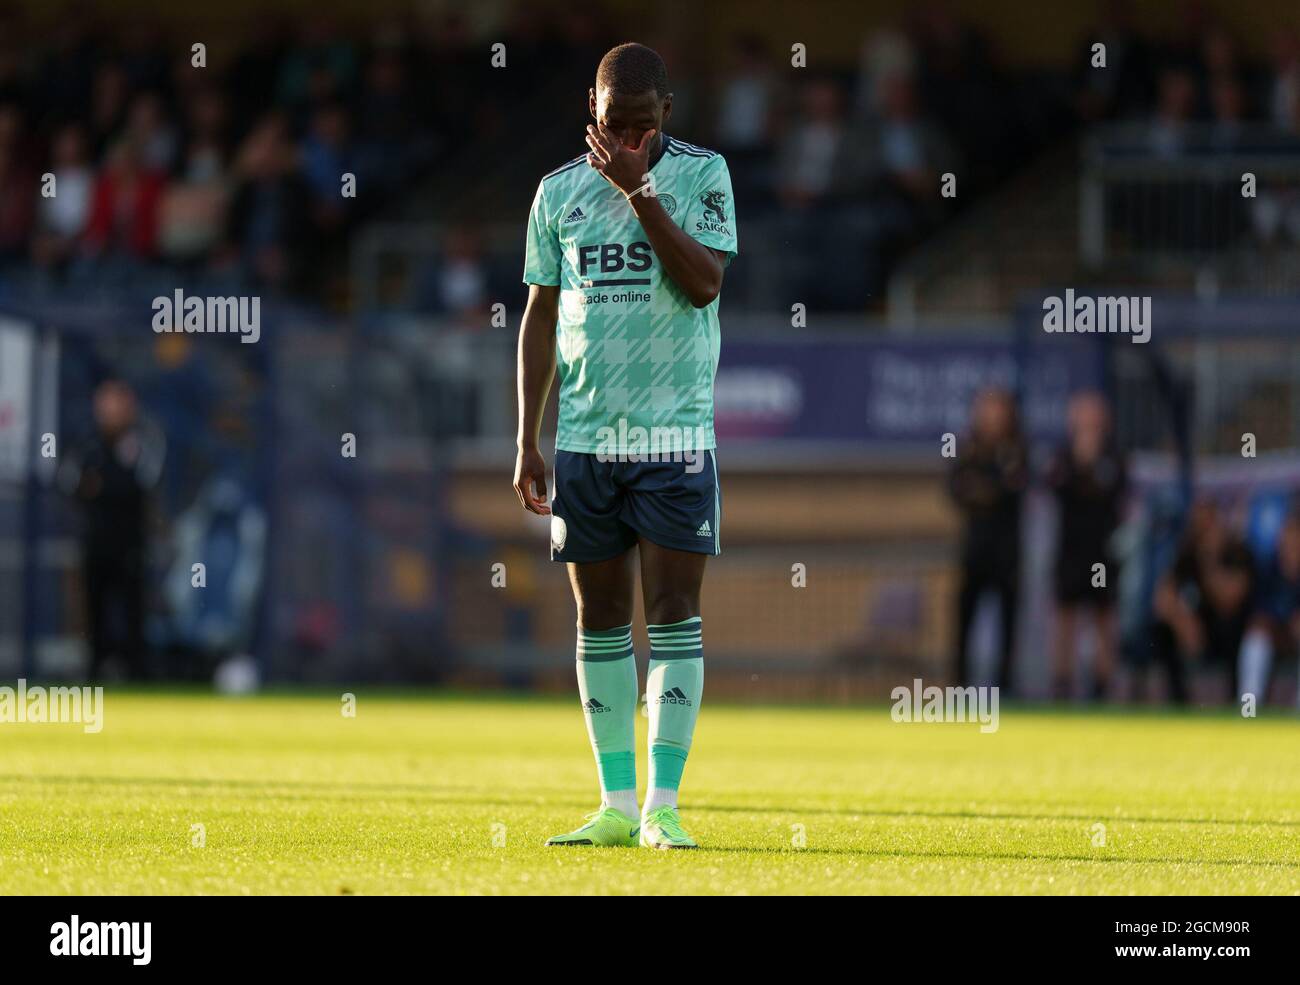 High Wycombe, UK. 28th July, 2021. Boubakary Soumare of Leicester City during the 2021/22 Pre Season Friendly match between Wycombe Wanderers and Leicester City at Adams Park, High Wycombe, England on 28 July 2021. Photo by Andy Rowland. Credit: PRiME Media Images/Alamy Live News Stock Photo